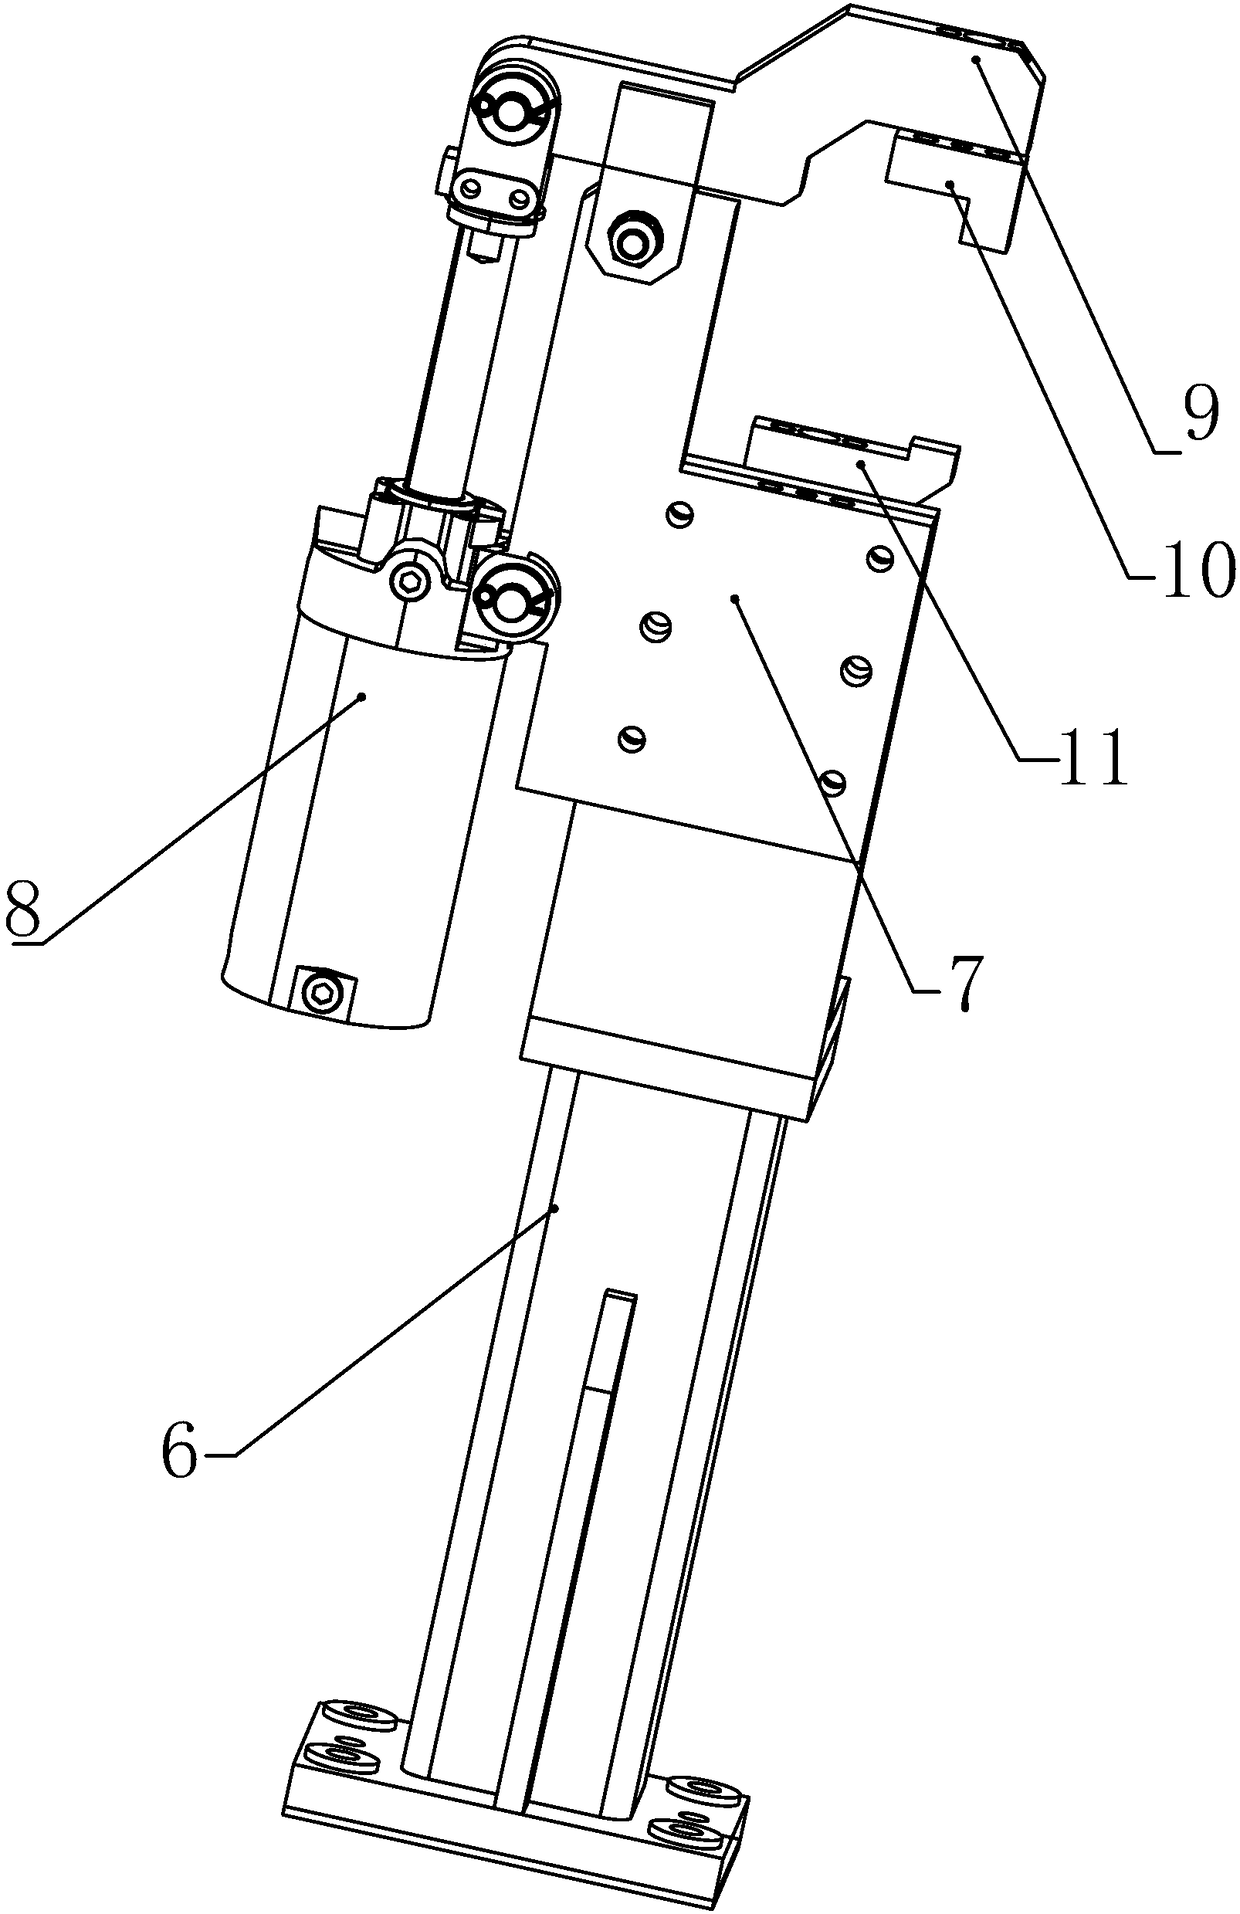 A fixture for auto parts with irregular cylinders